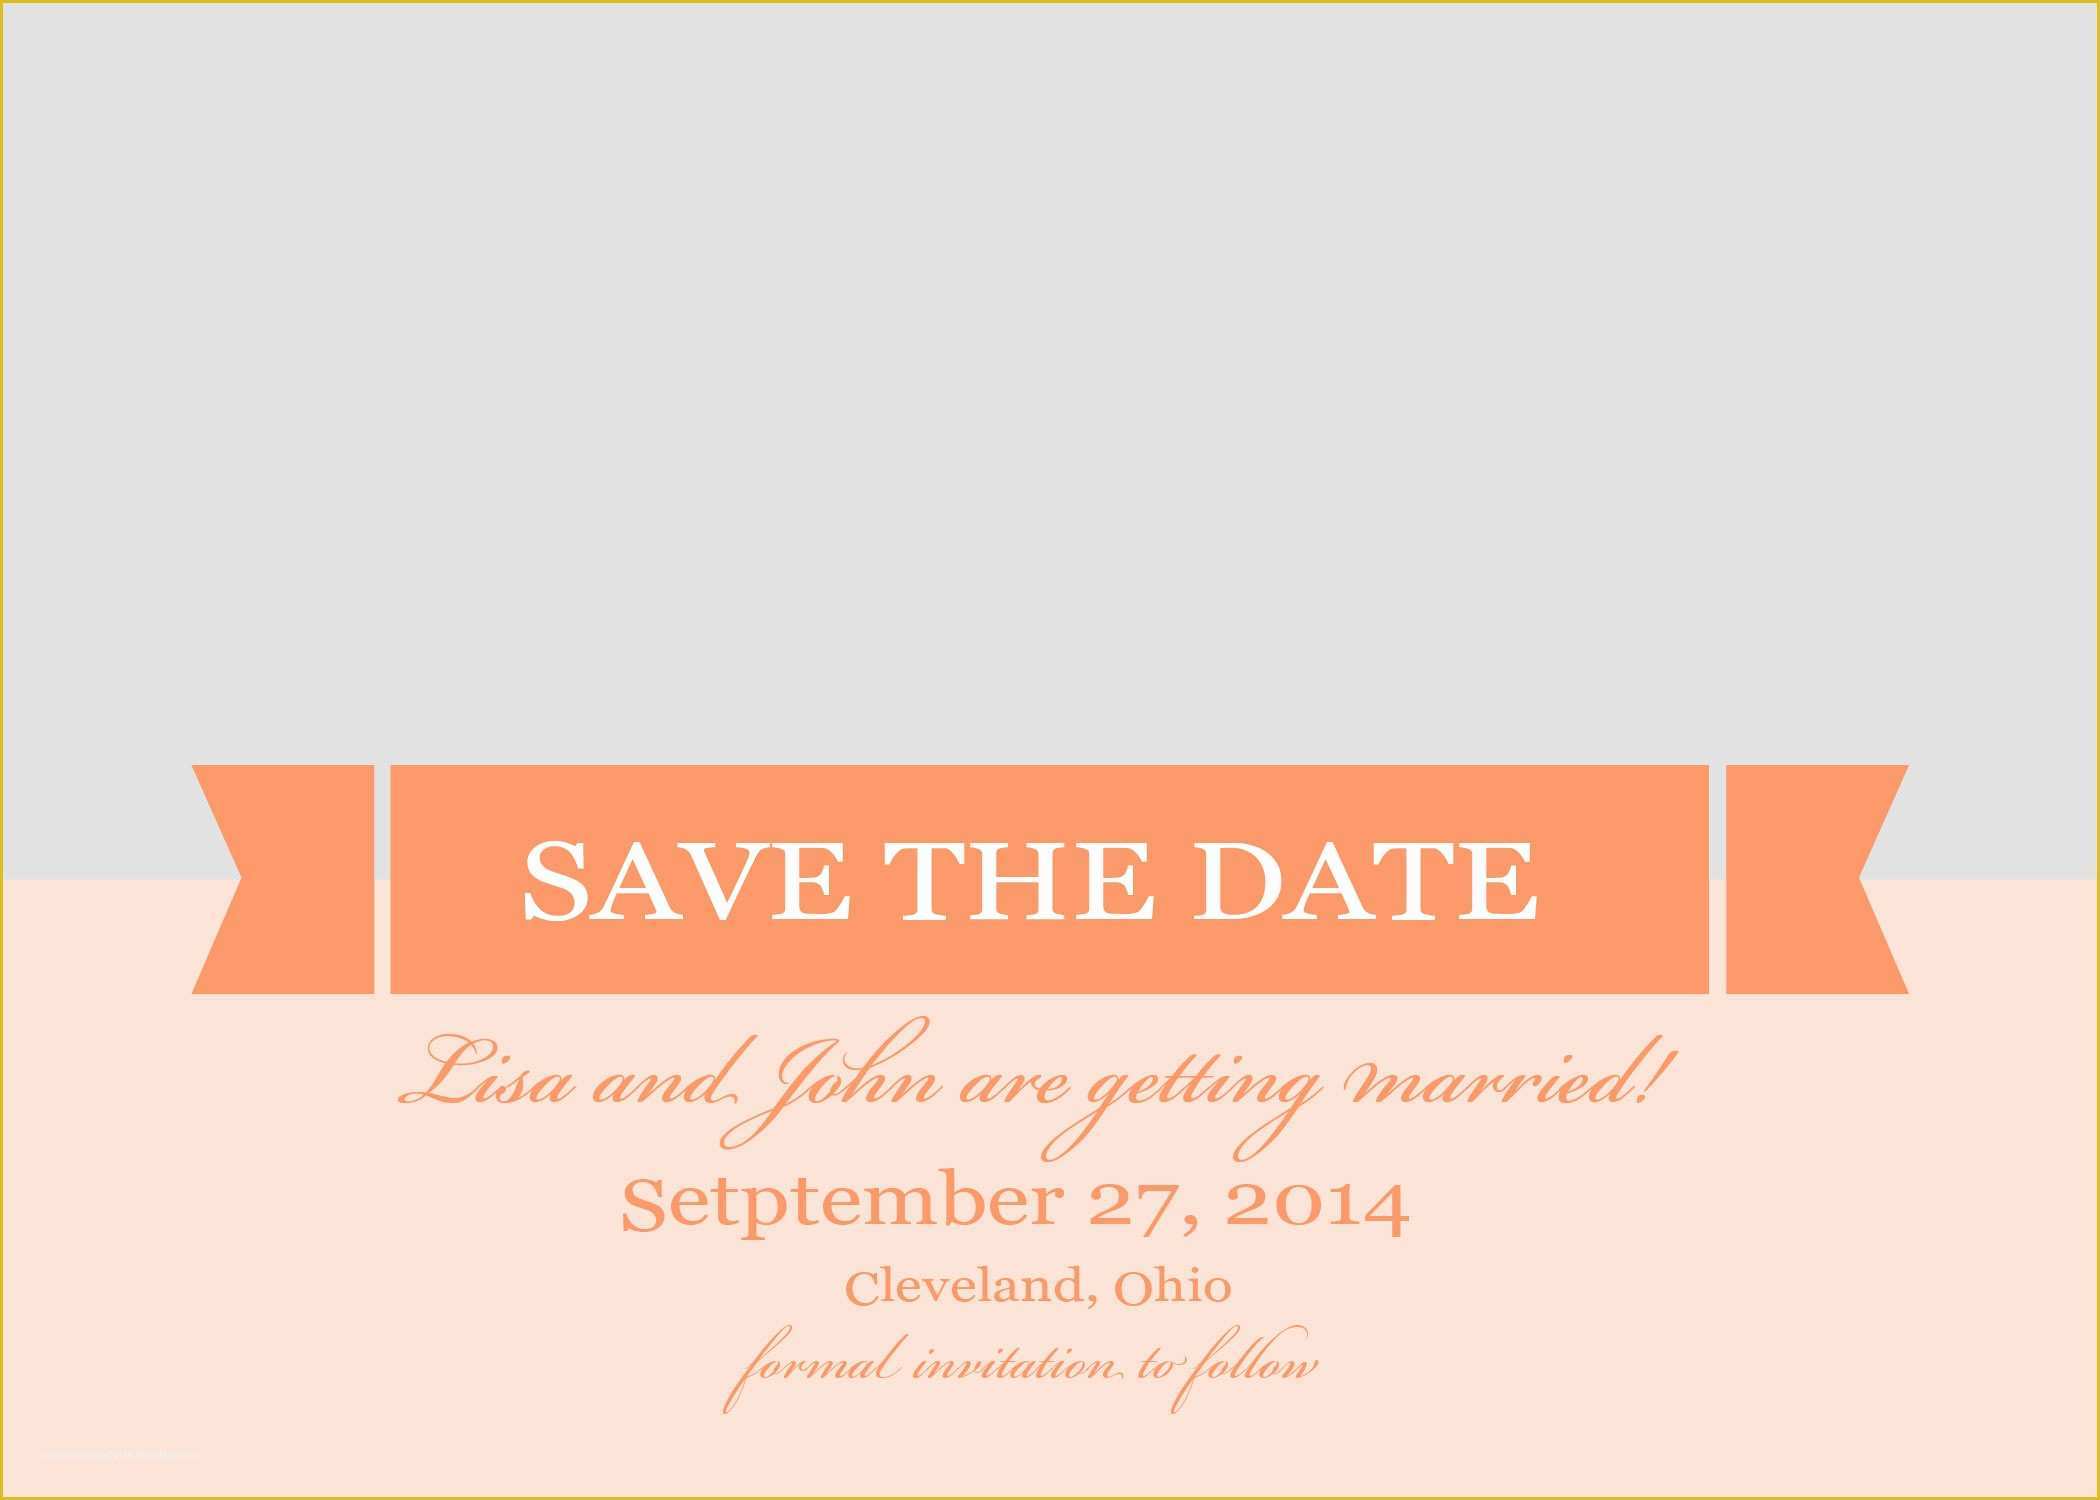 Save the Date Templates Free Online Of 5 Save the Date Card Editable Templates for Free